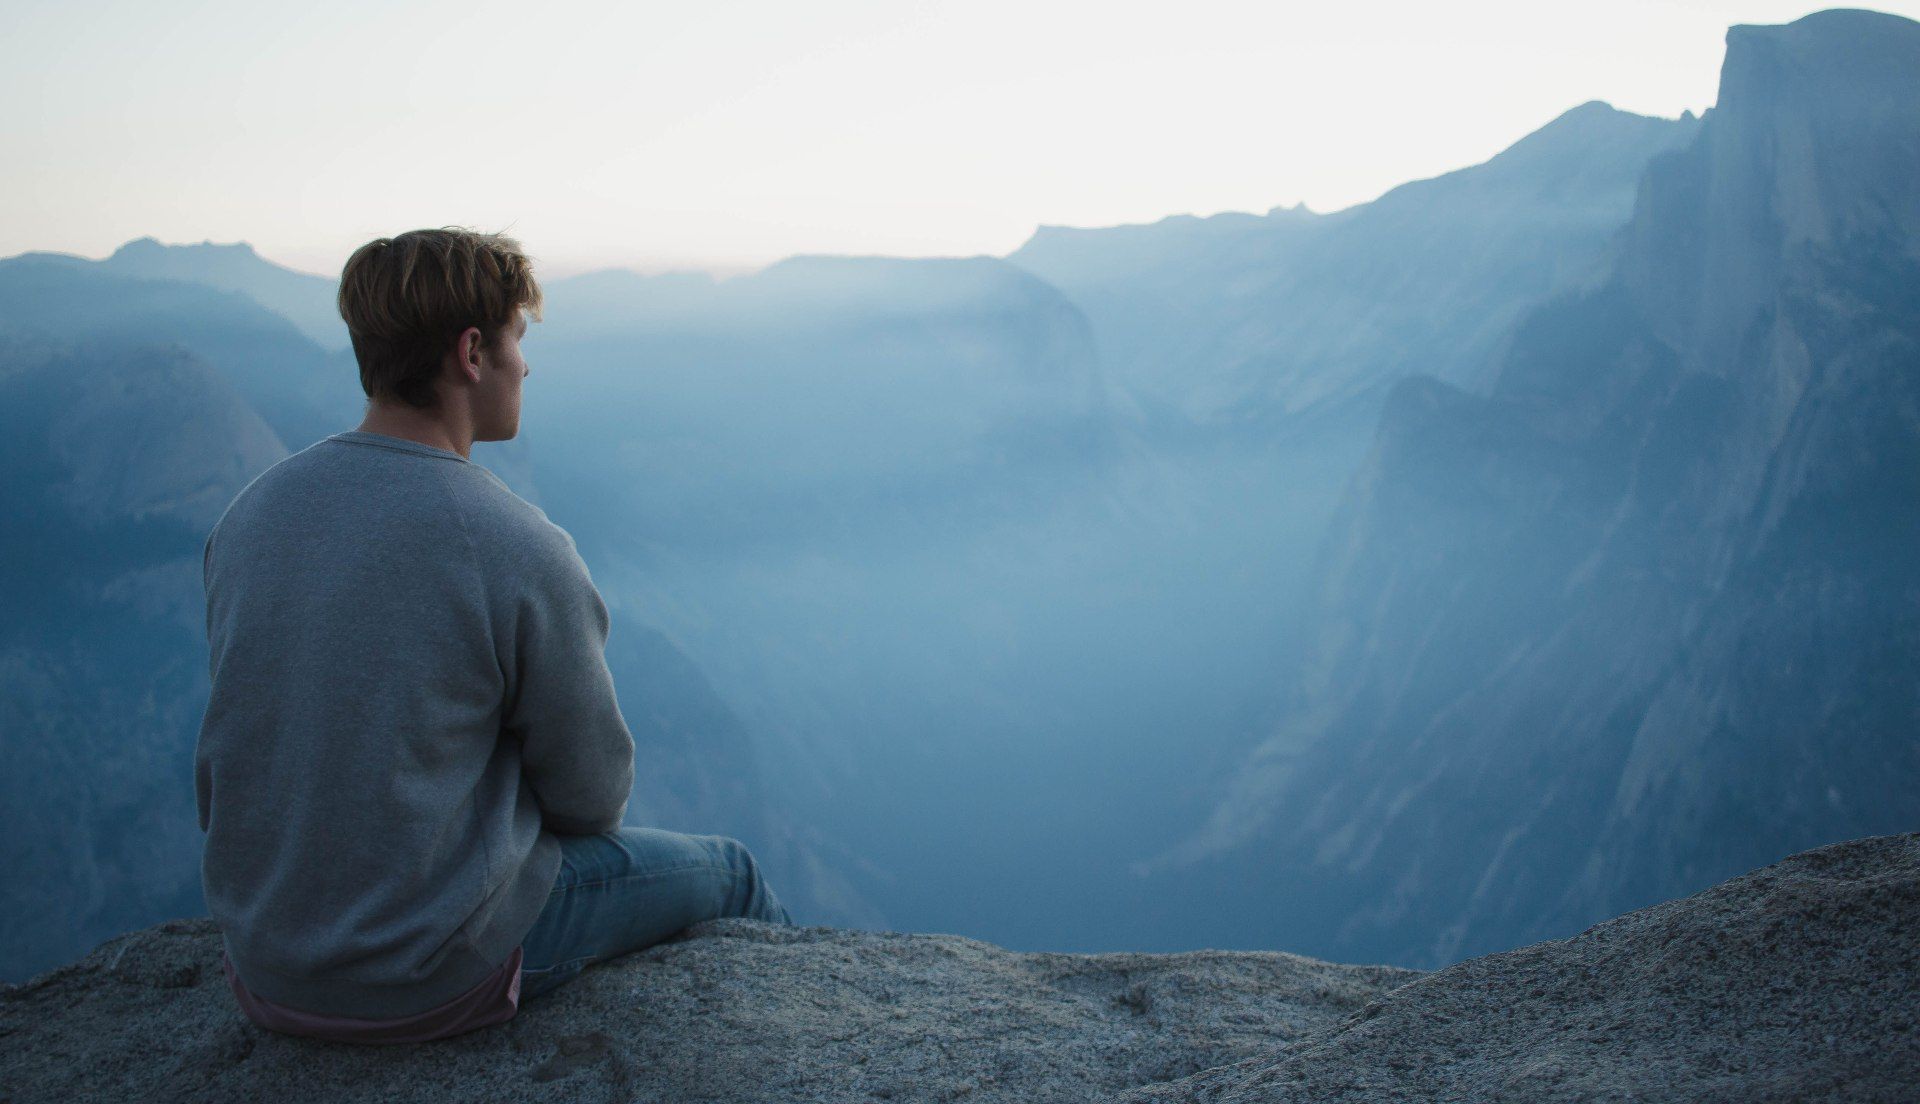 Man sitting on edge of cliff looking into the distance lost in thought